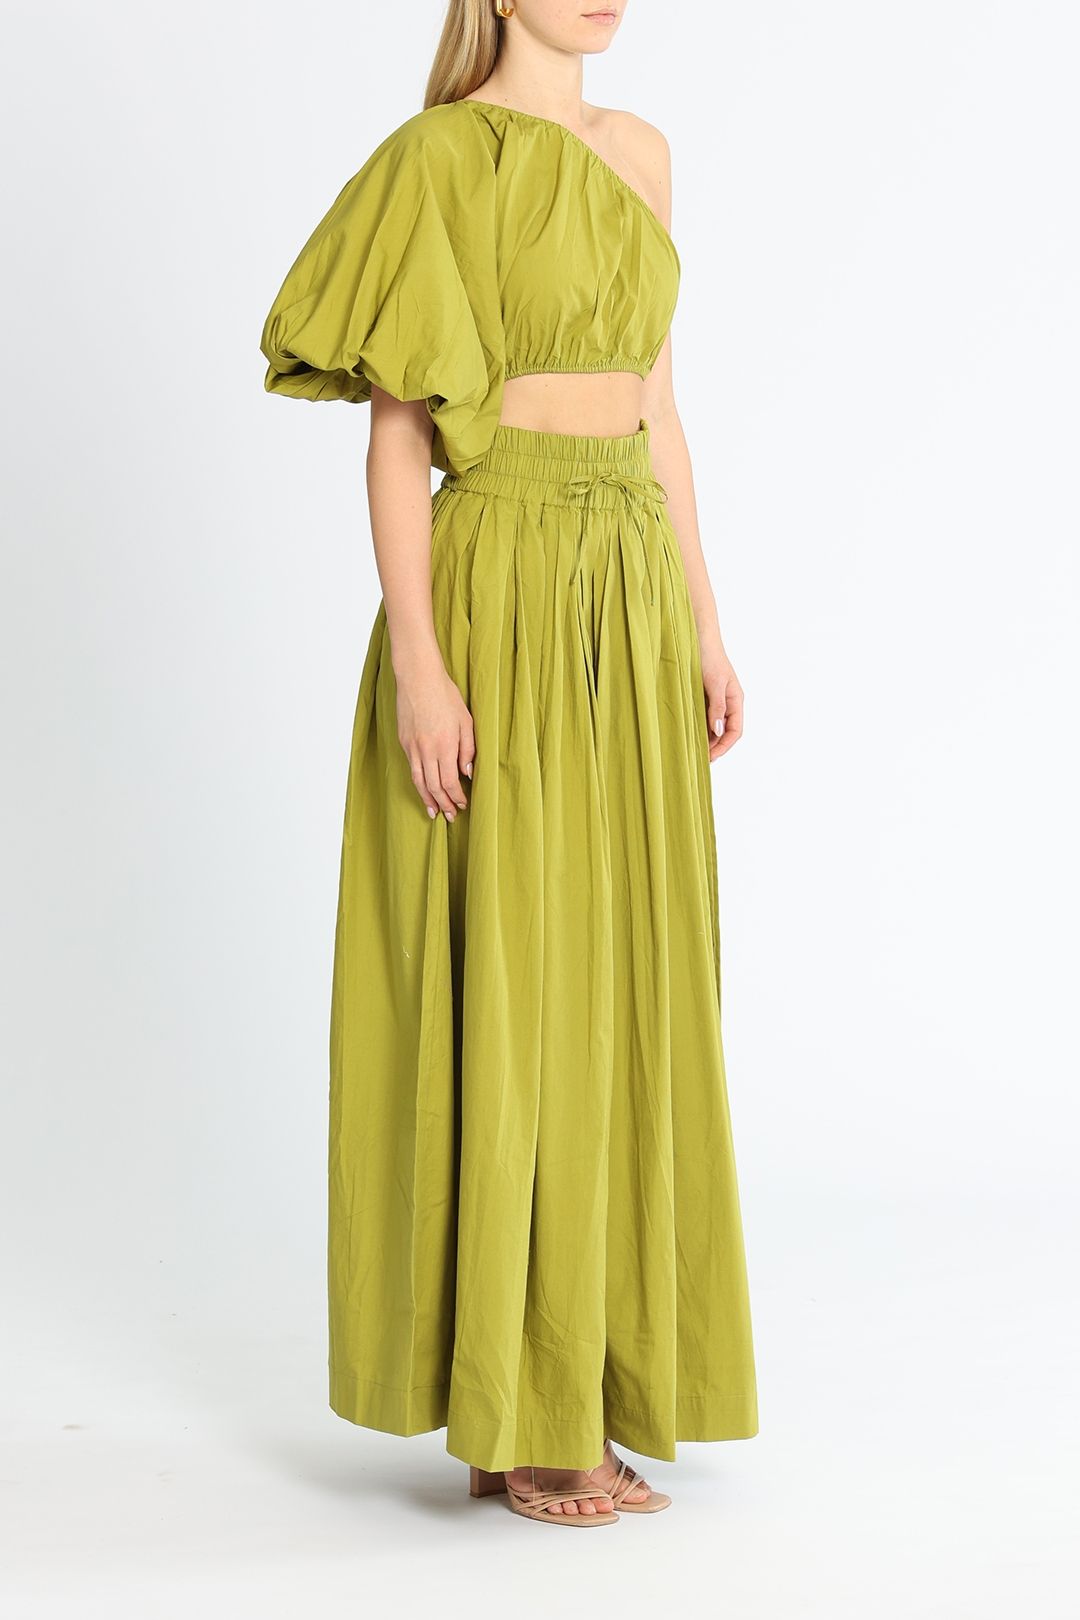 SWF Exaggerated One Shoulder Crop and Skirt Set Green Maxi